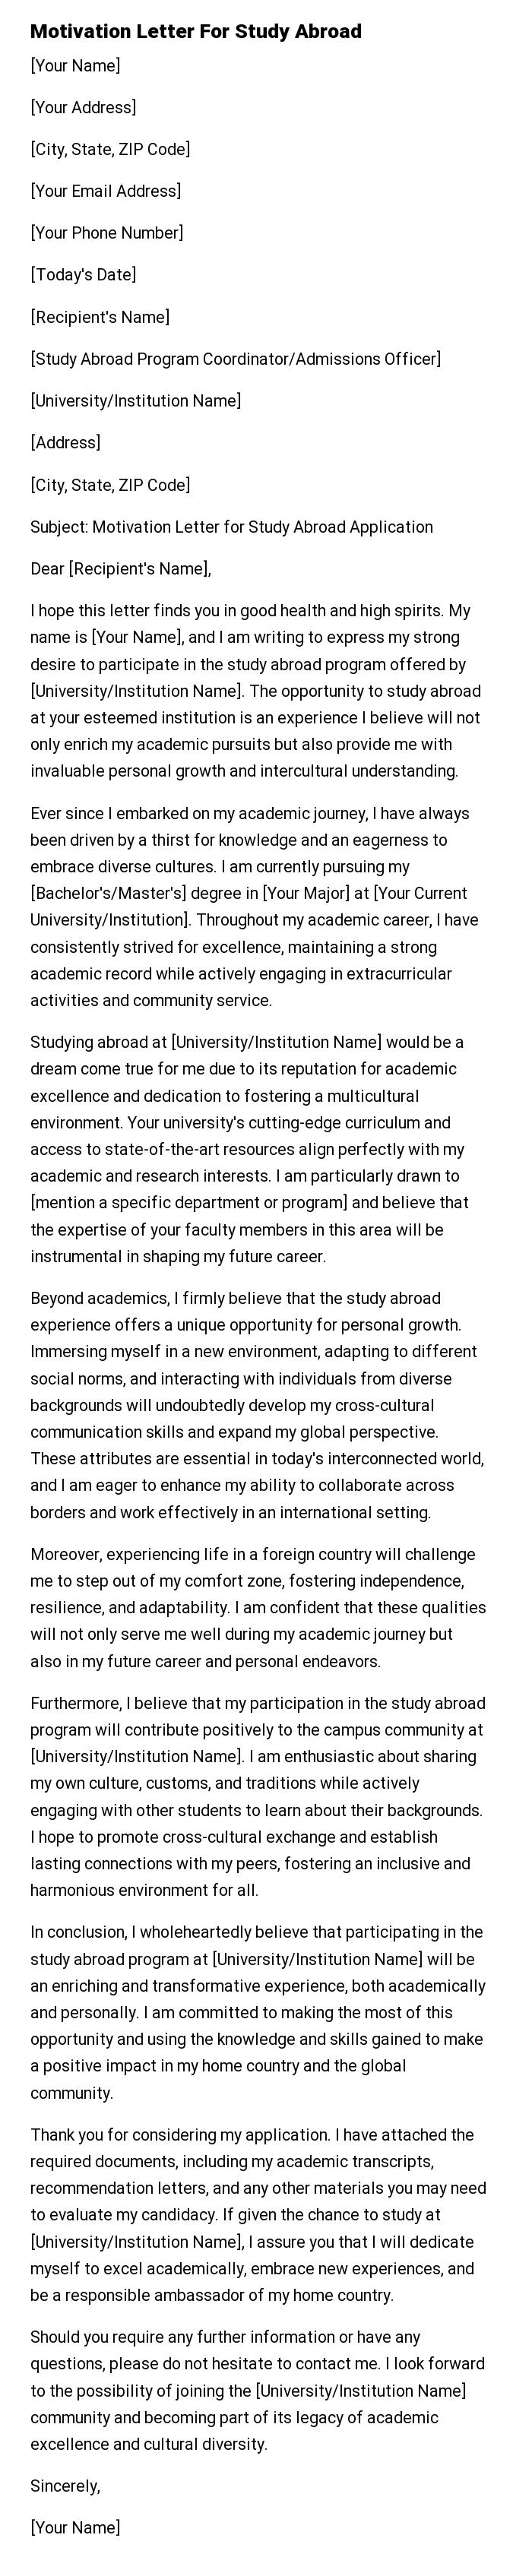 Motivation Letter For Study Abroad